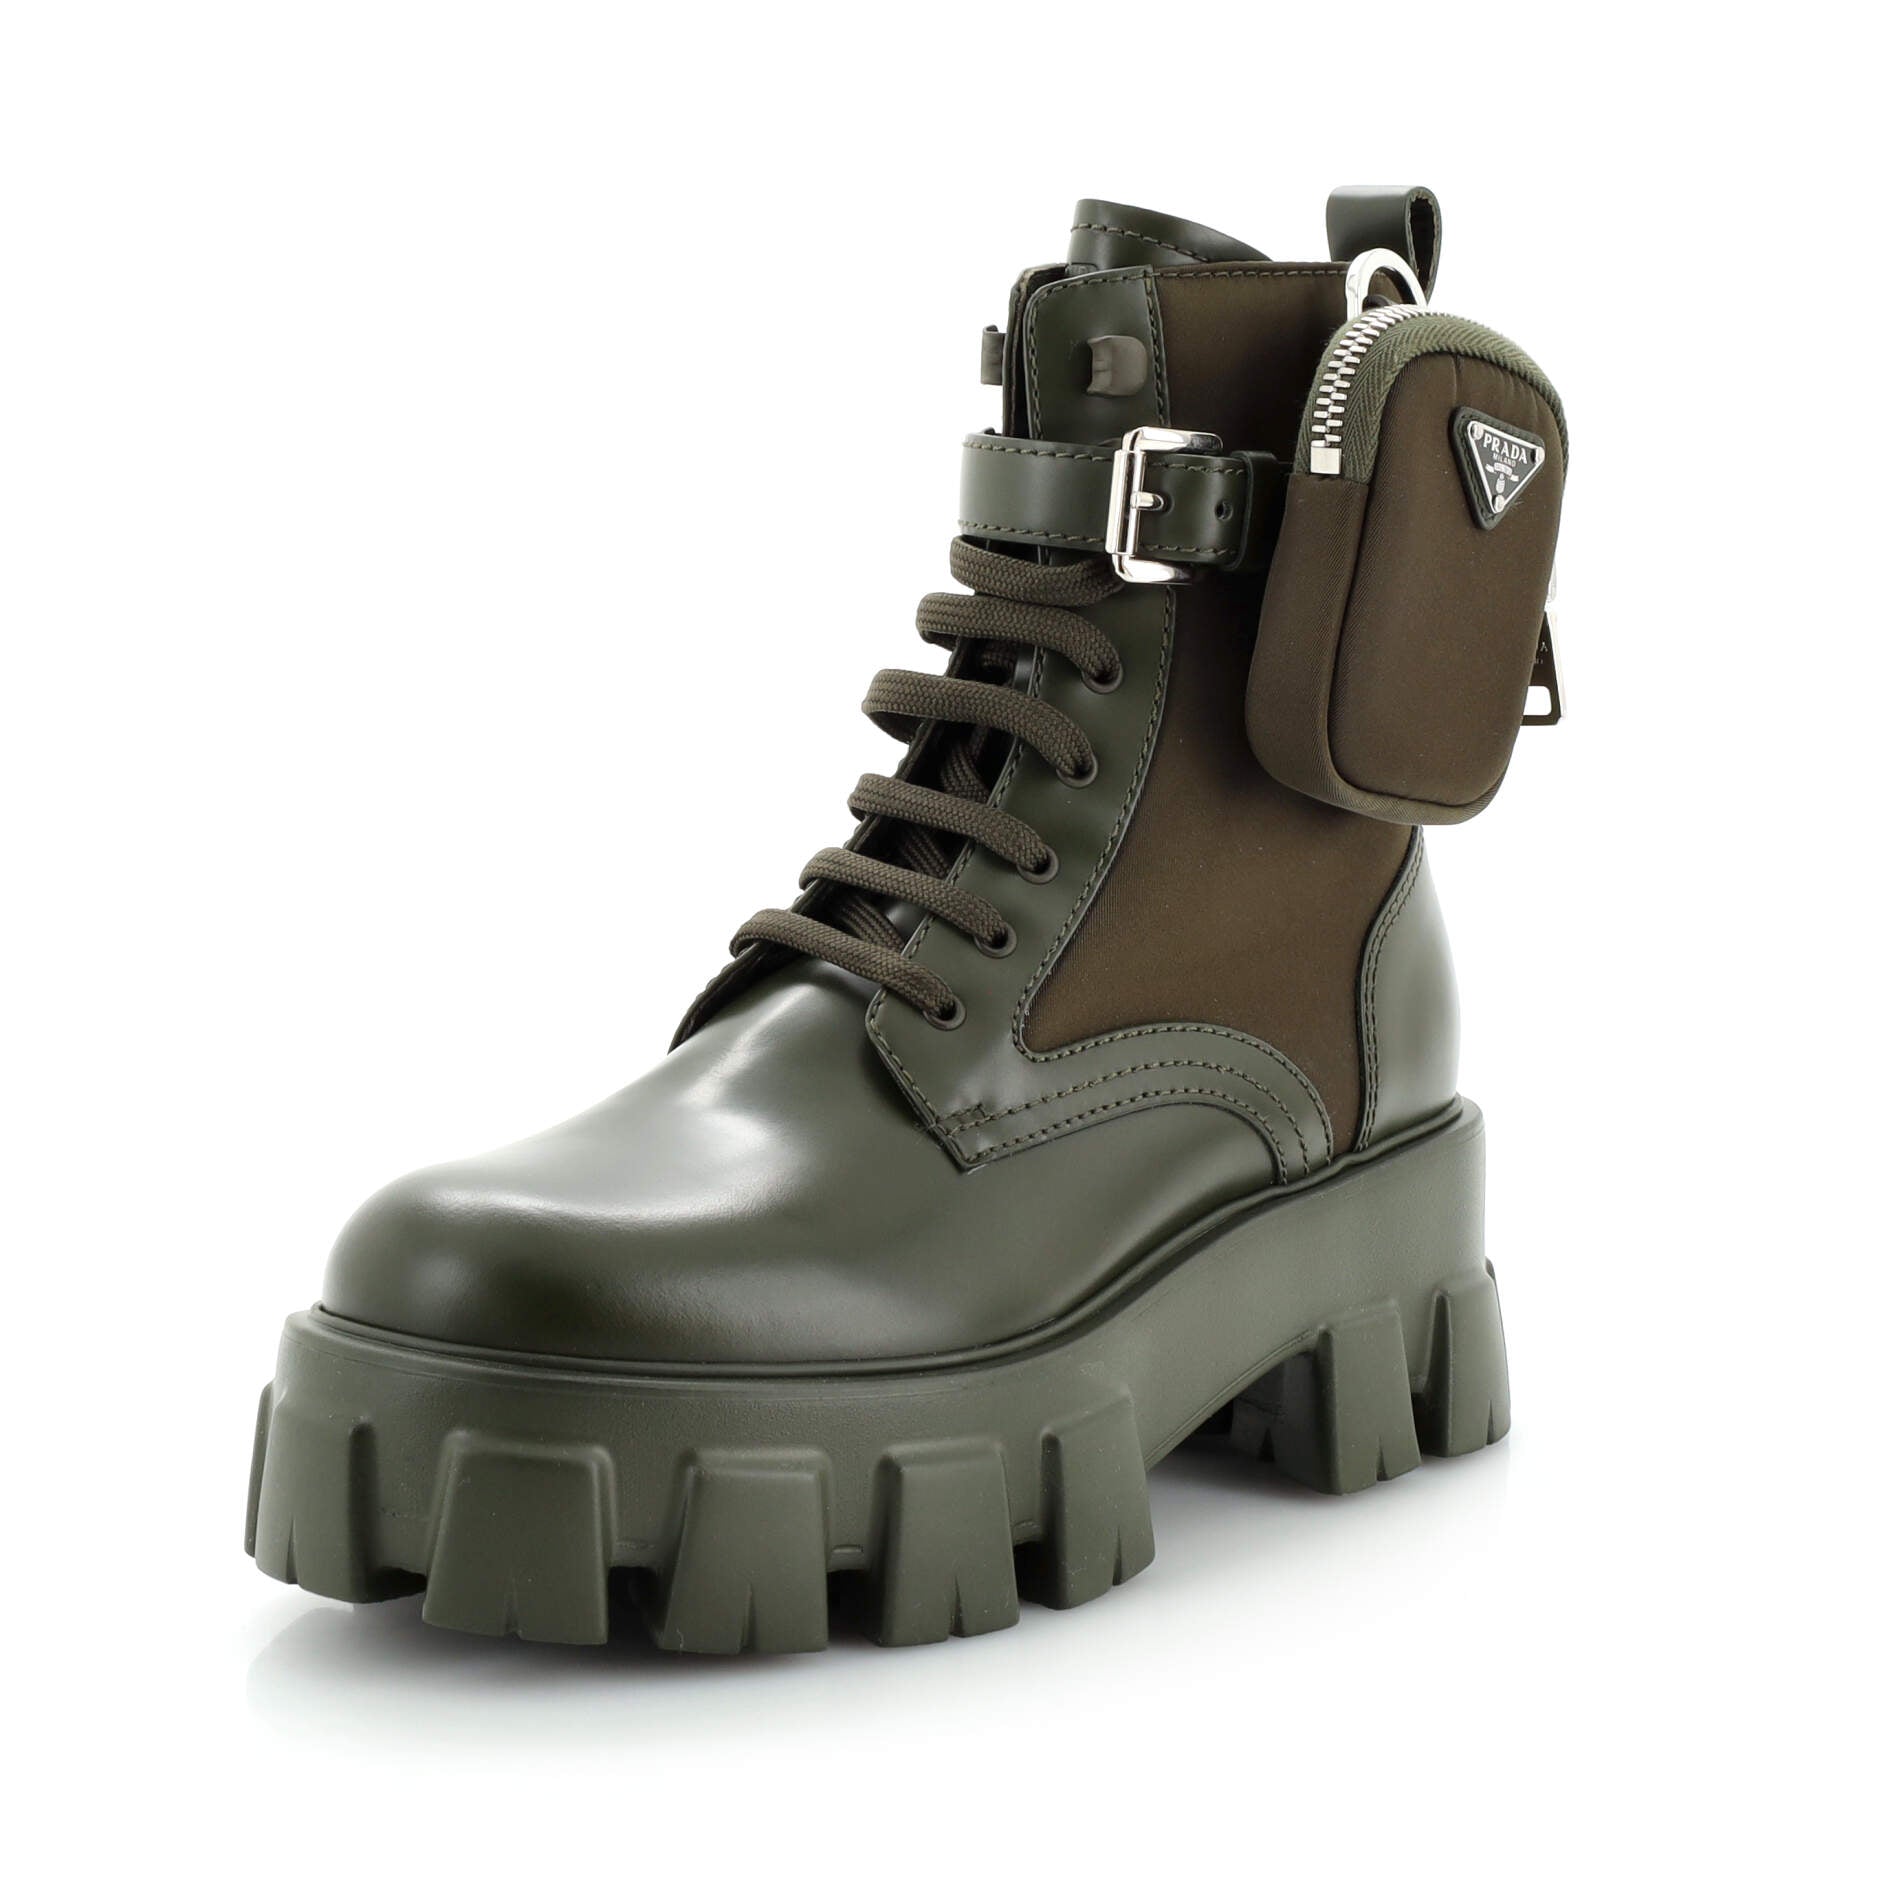 Monolith Combat Boots Leather and Nylon